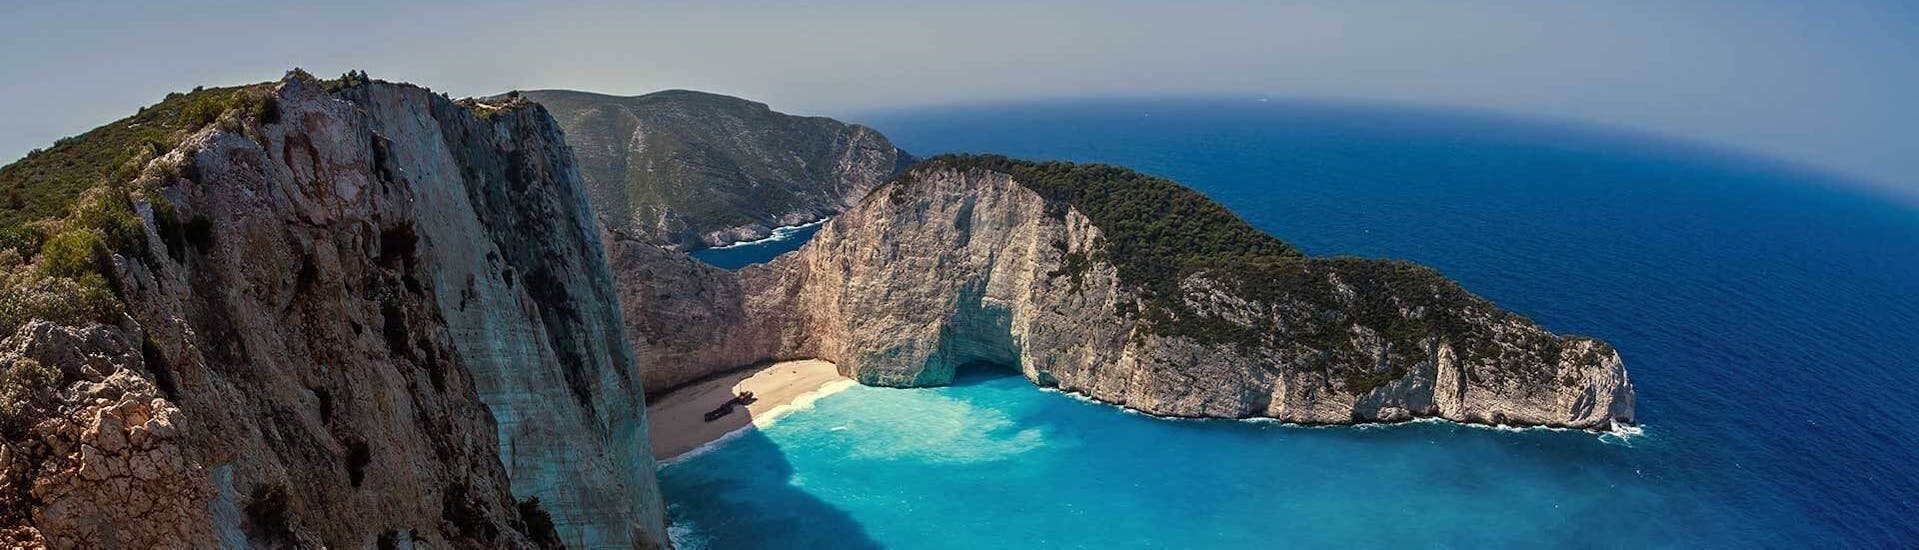 Bay of Zakynthos during the RIB Boat Trip to the Blue Caves, Navagio and Xygia Beach with Swimming.